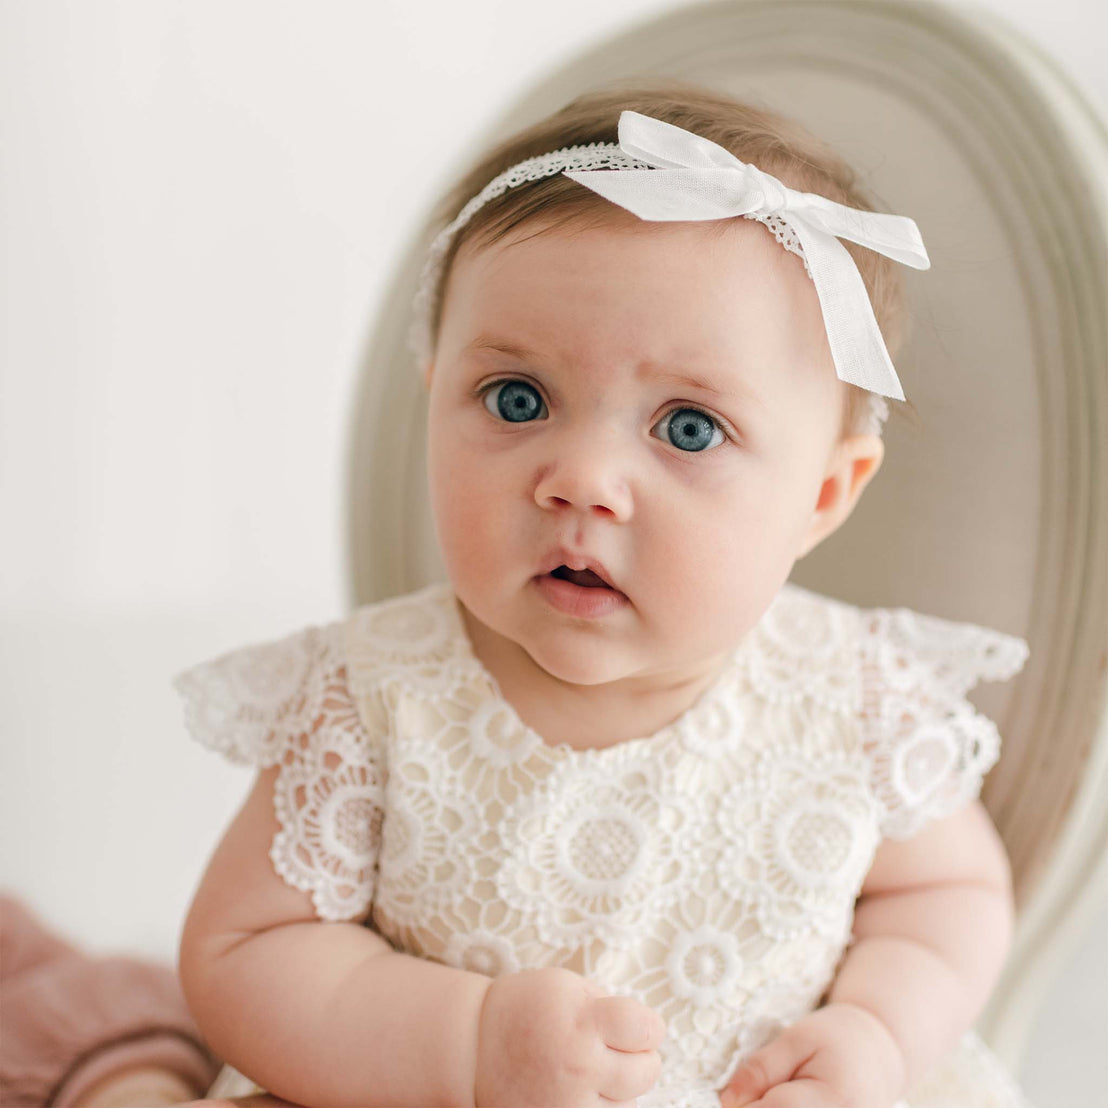 A baby with blue eyes and light brown hair sits on a chair. The baby is wearing a Poppy Blessing Dress & Bonnet adorned with a silk dupioni lining and has a white bow headband. The baby is looking slightly to the side with a neutral expression.